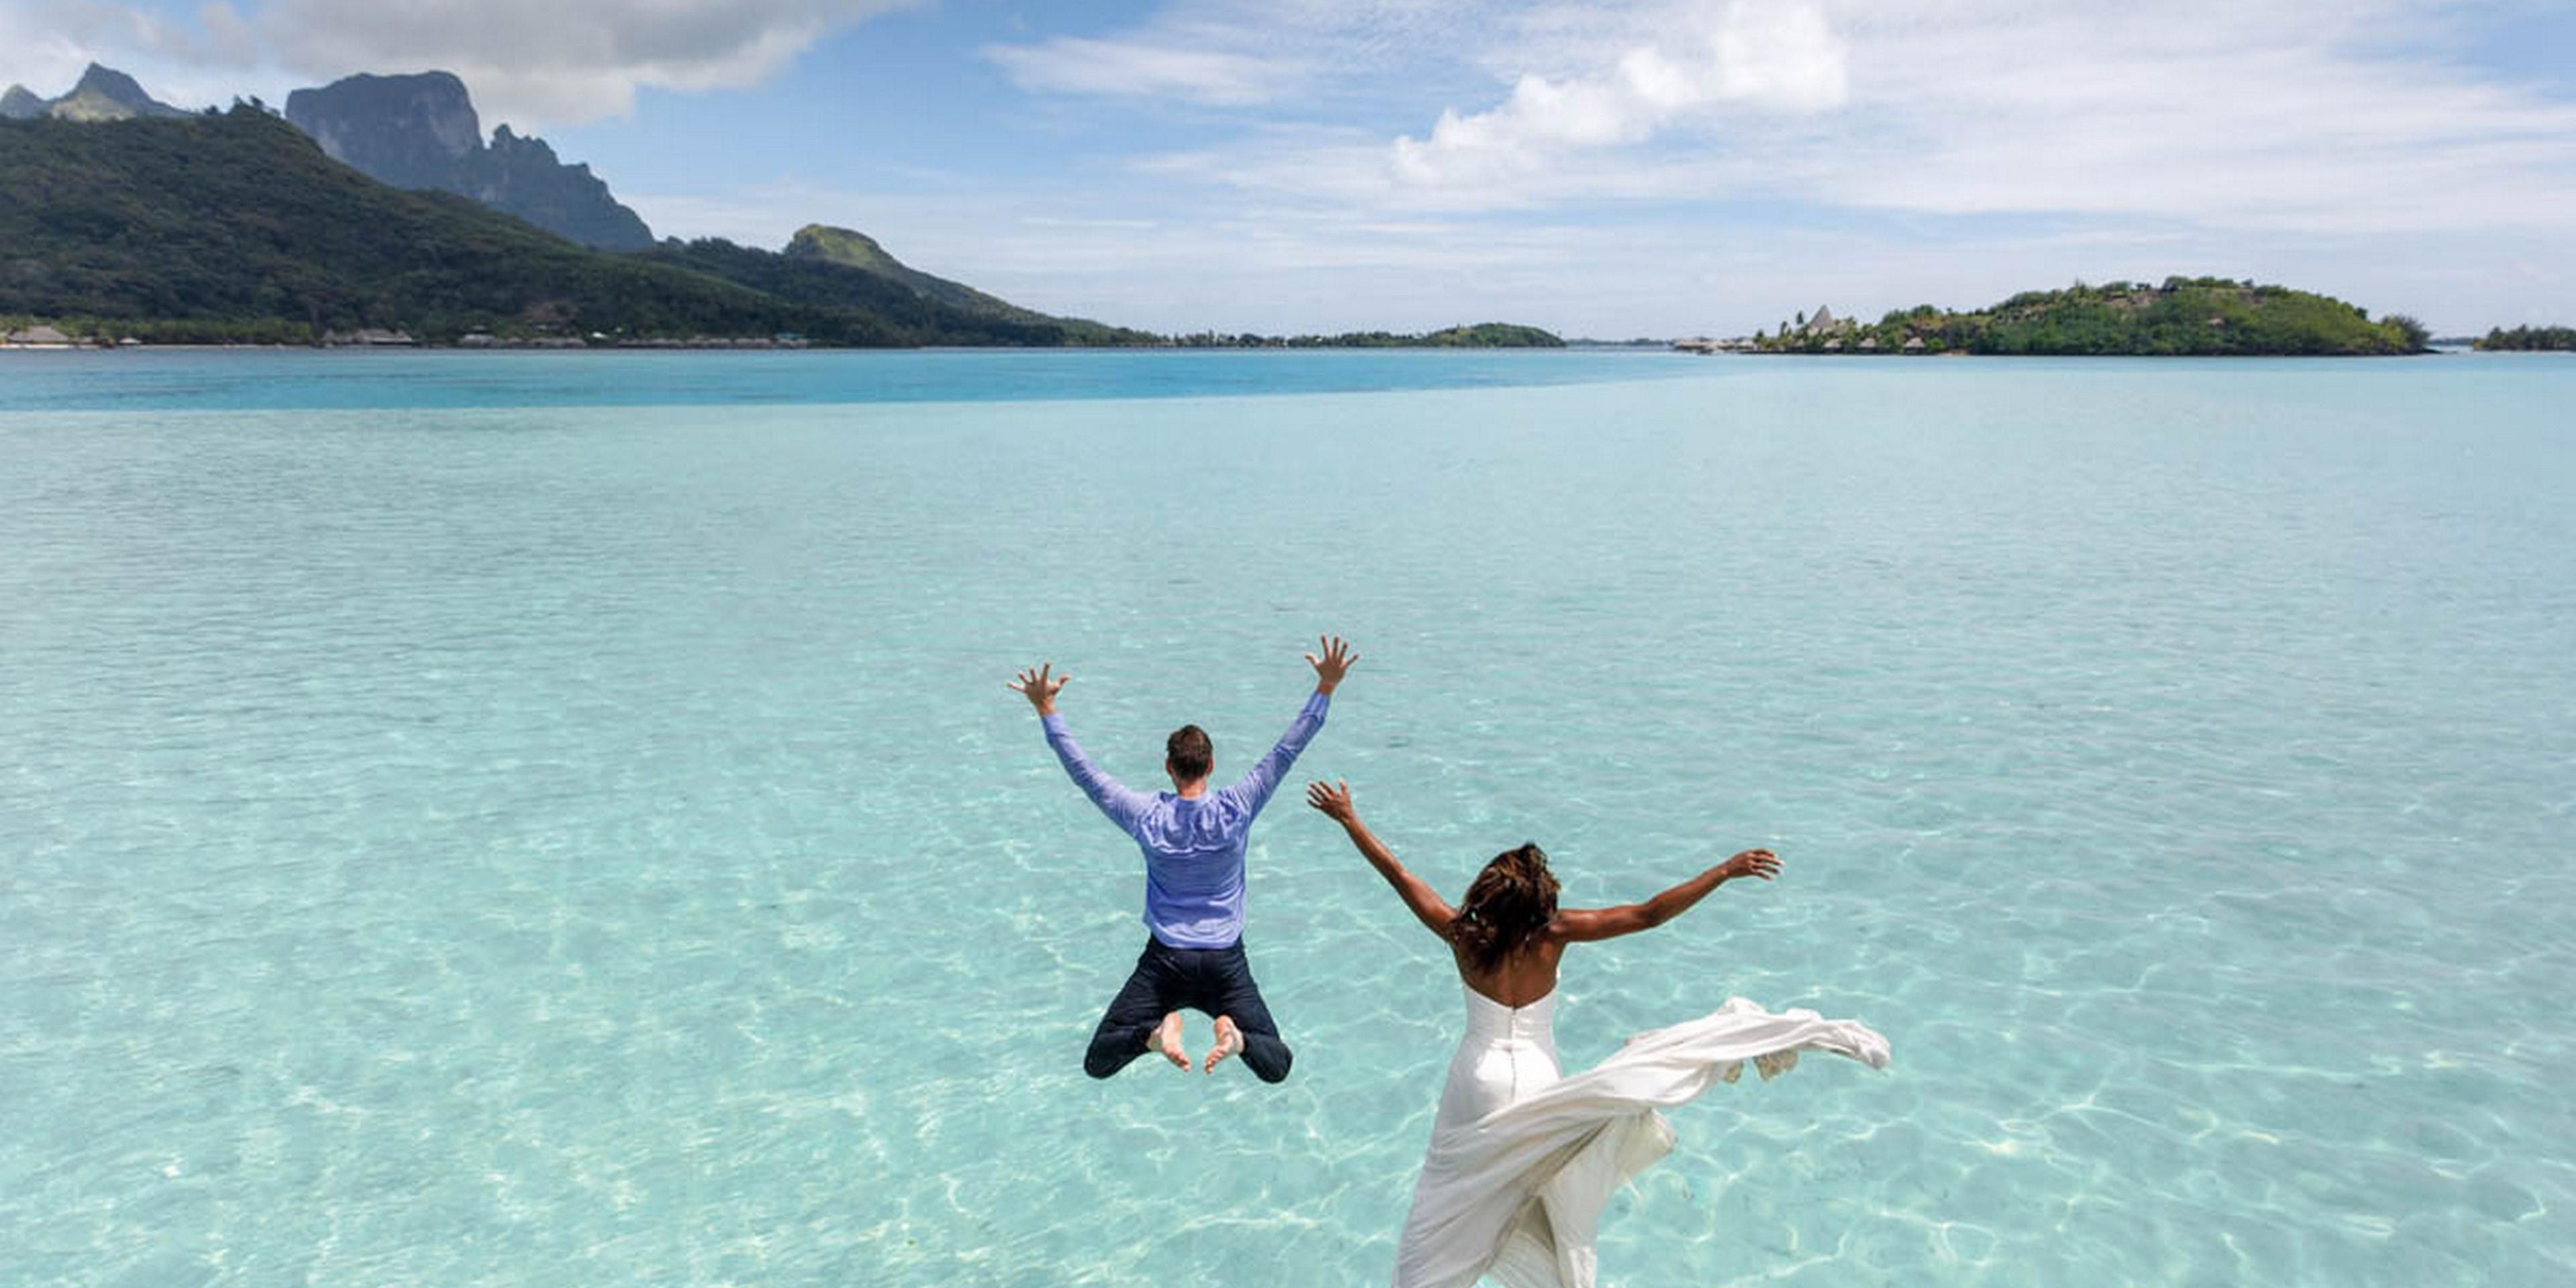 When you have a Bora Bora wedding, you’re assured a spectacular backdrop. We can organize the most unforgettable event, whether it’s a Western-style exchanging of vows or a unique Polynesian celebration. Our concierge team has extensive experience in planning ceremonies in traditional Tahitian fashion.